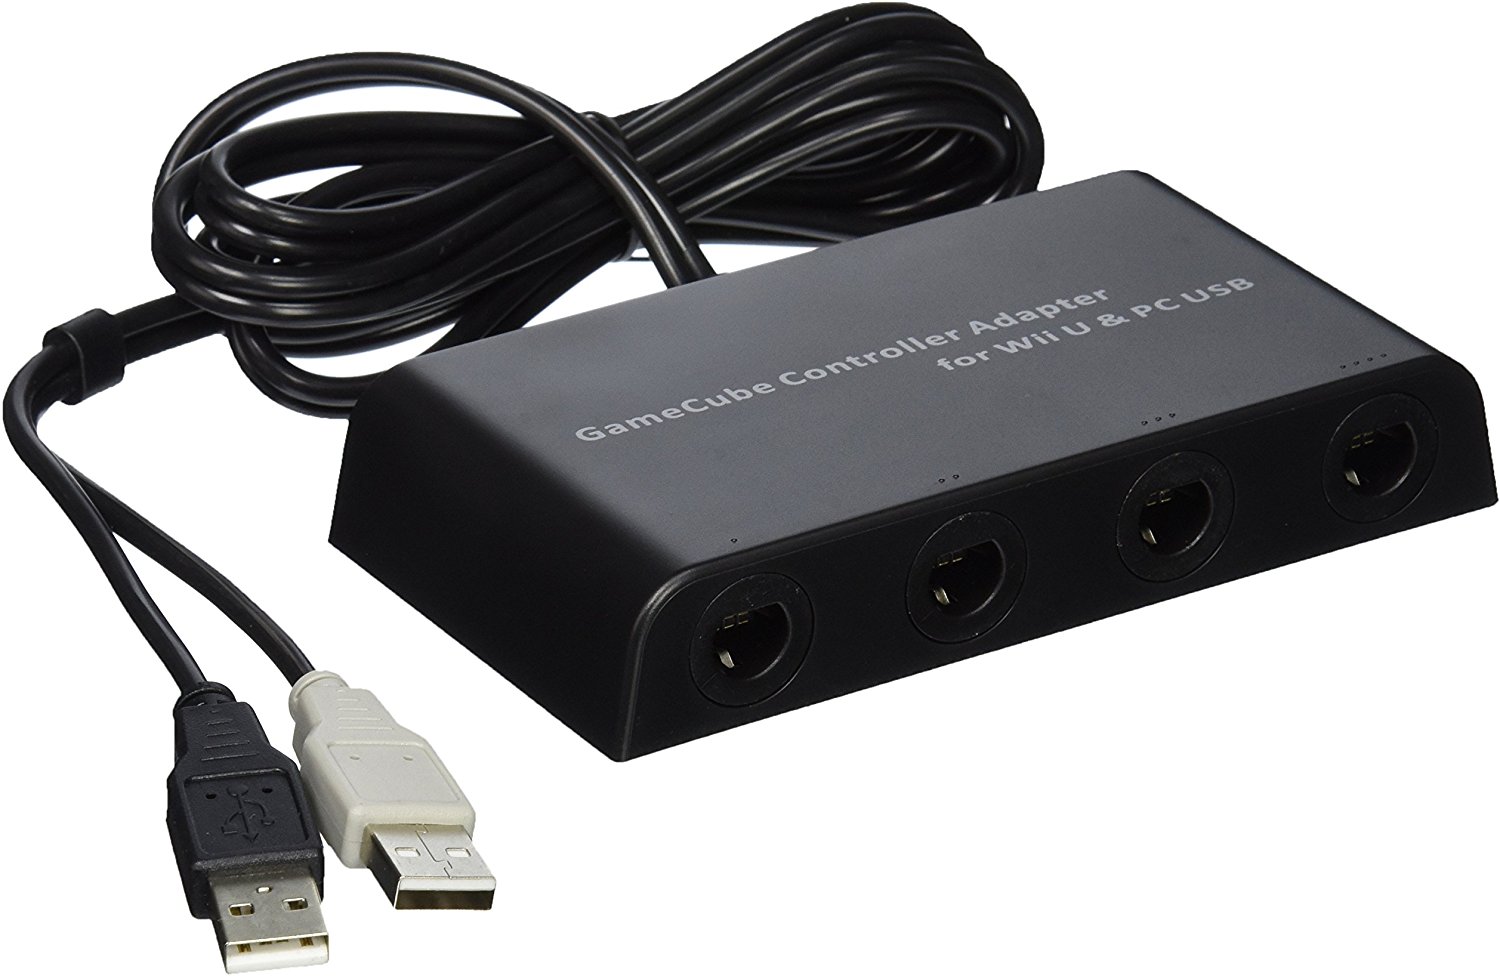 official gamecube controller adapter for pc